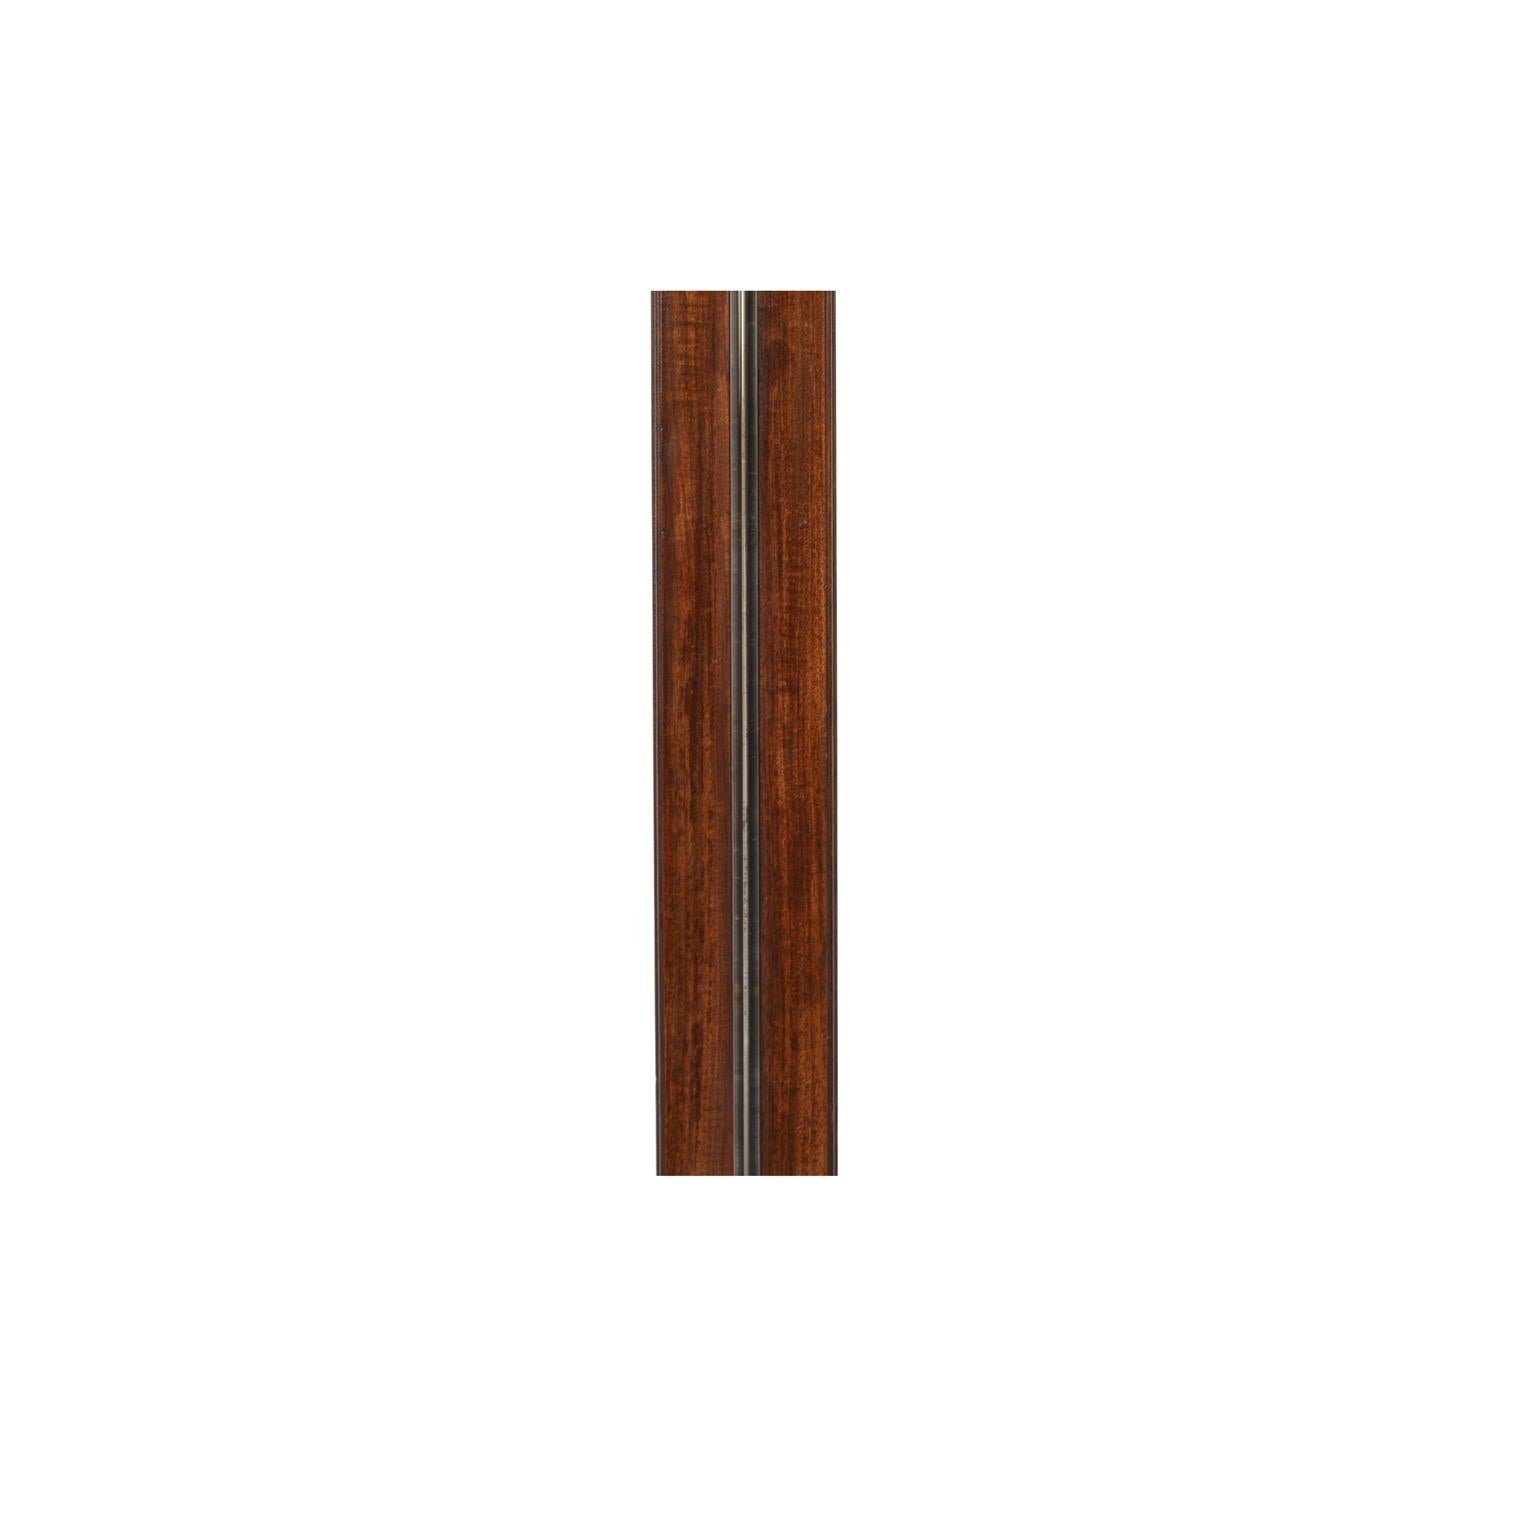 Late 18th Century Stick Barometer Mahogany Board Antique Weather Measuring Instrument J. Ramsden  For Sale